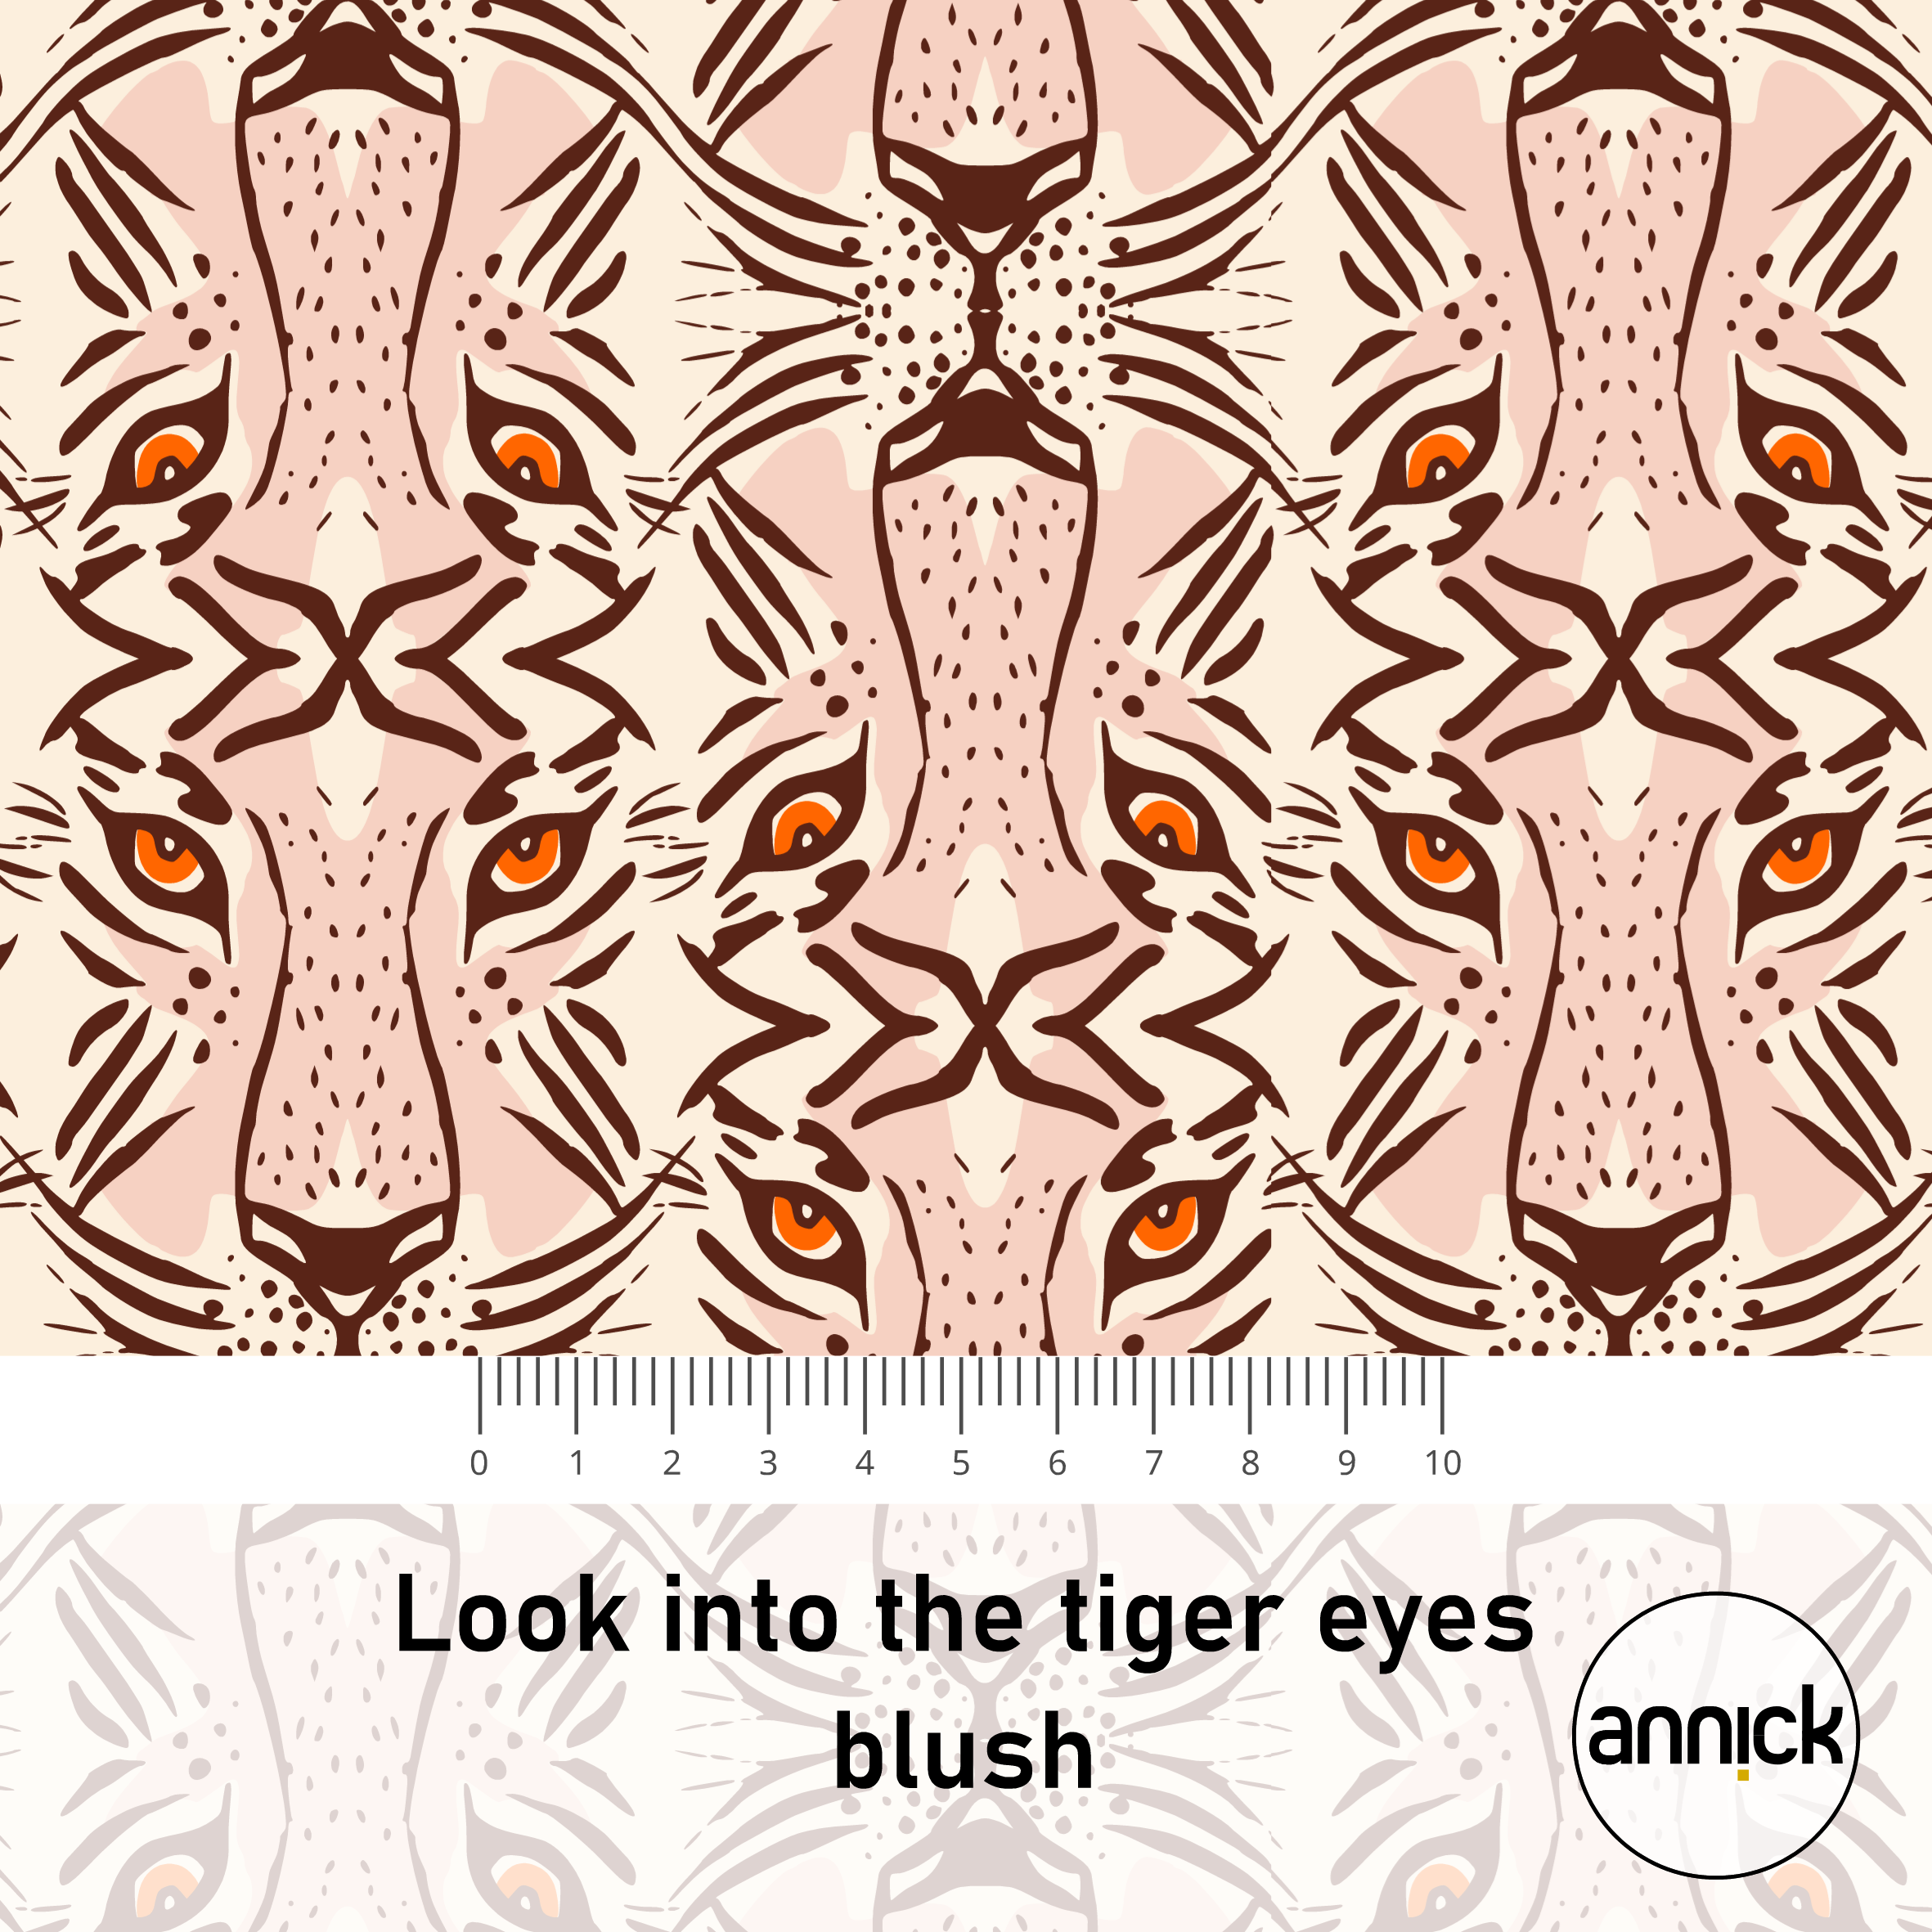 Look into the tiger eyes blush